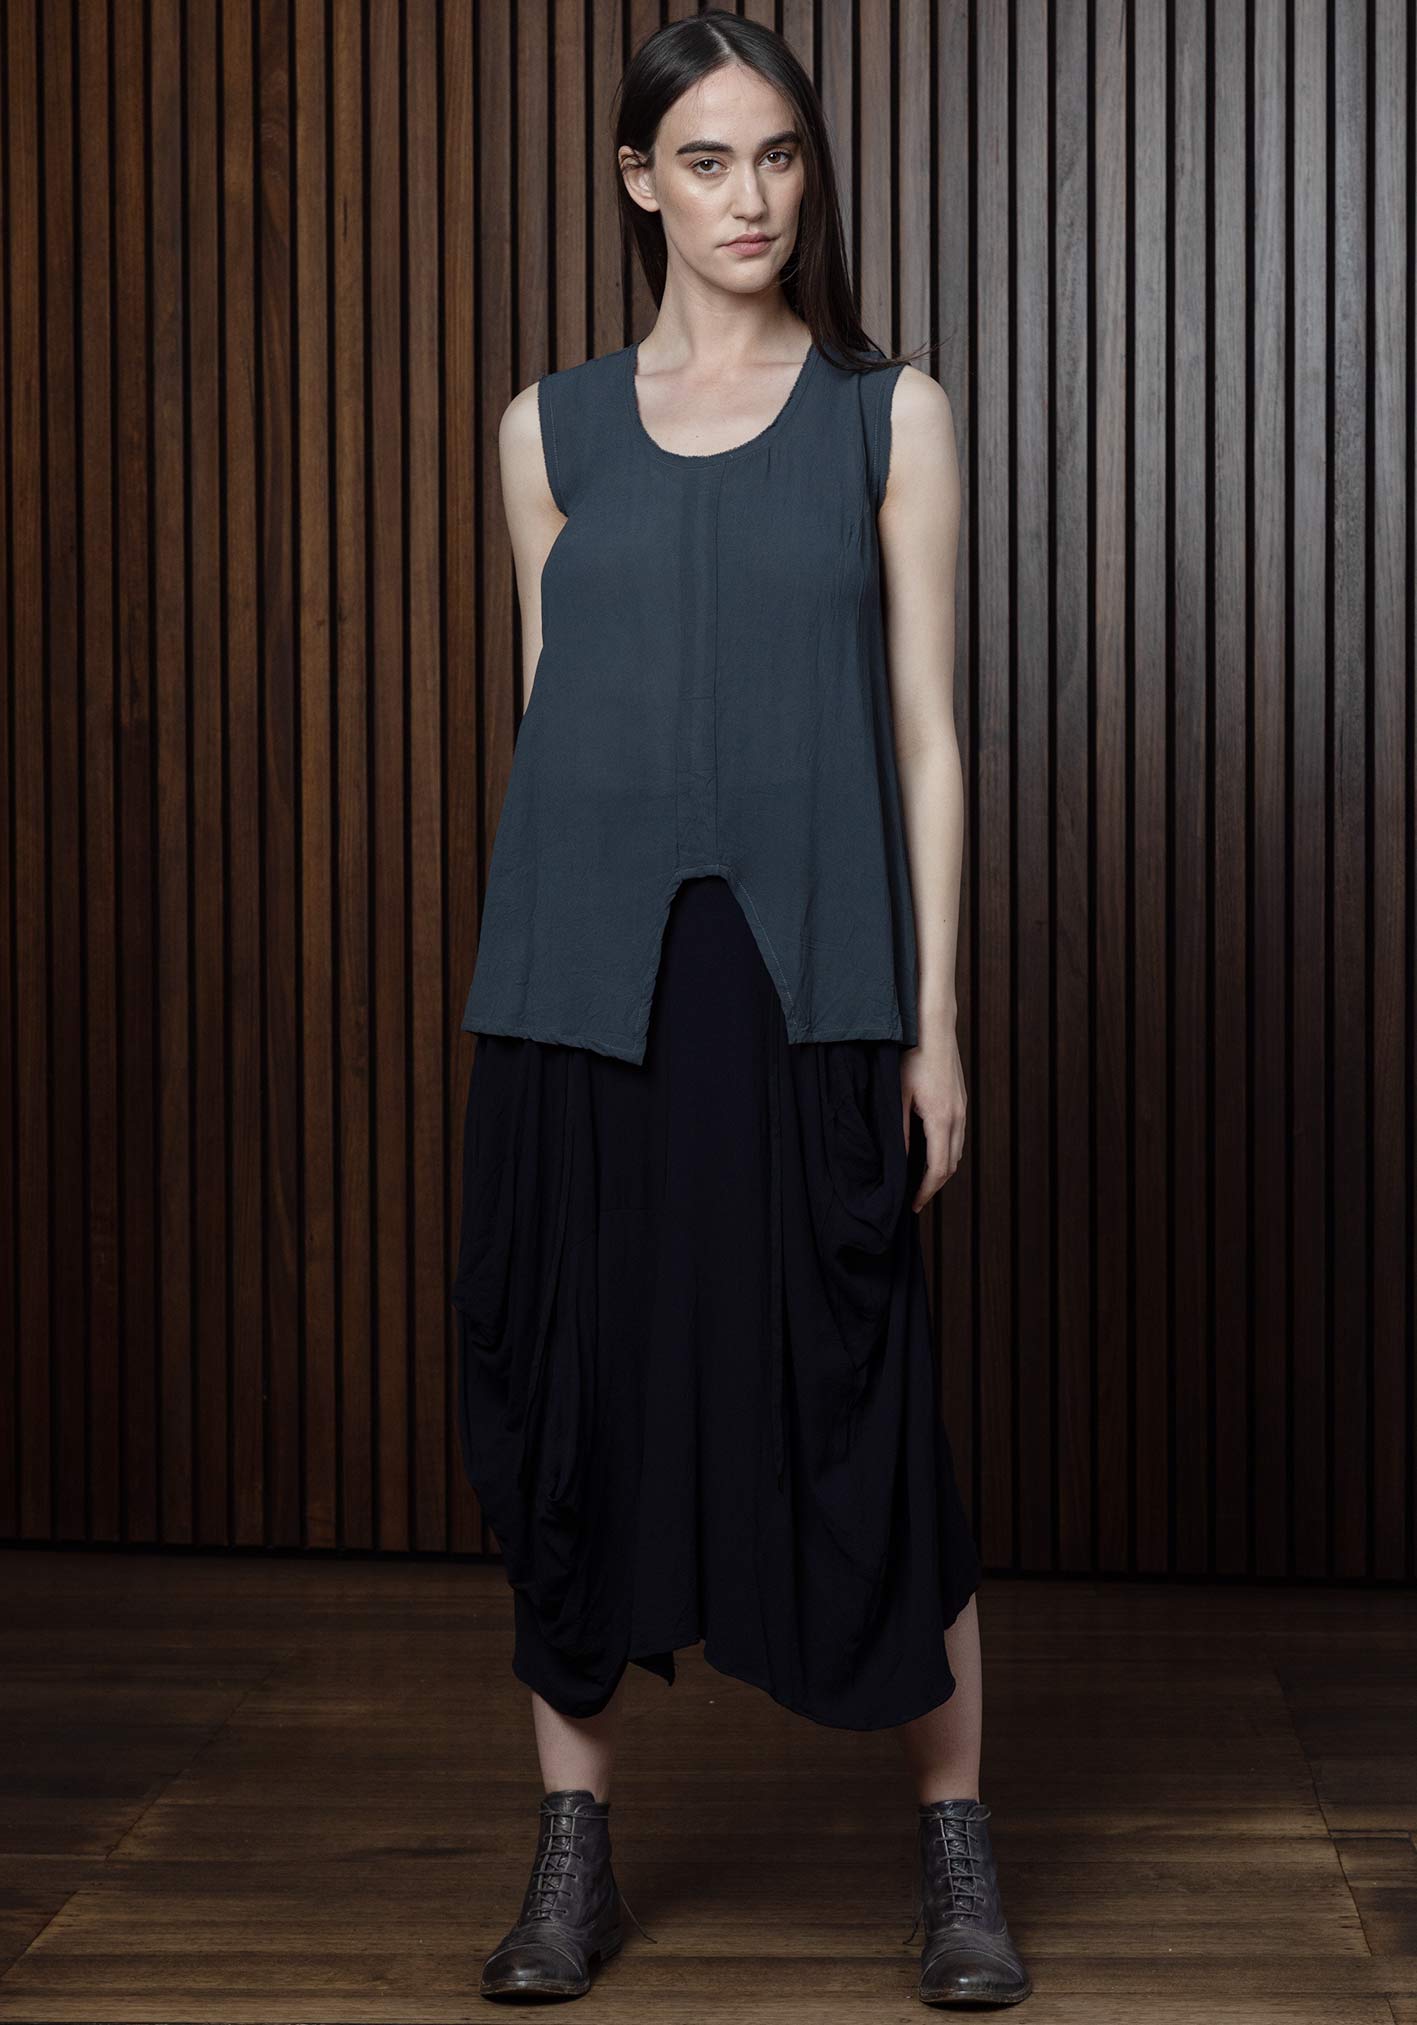 buy the latest Angle Front Top Sleeveless online